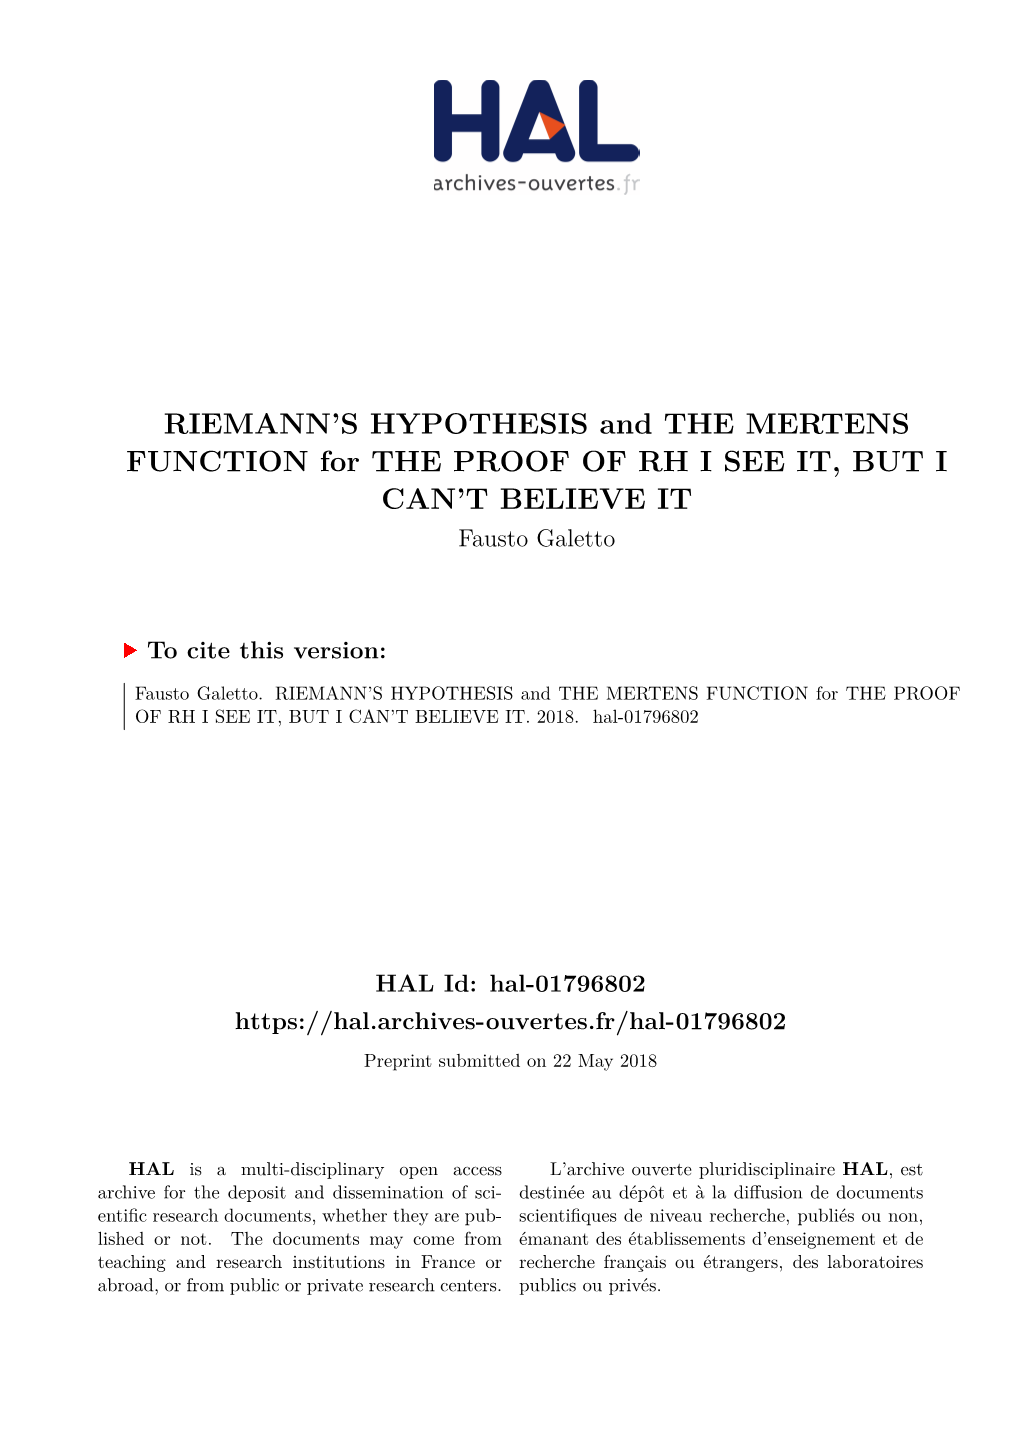 RIEMANN's HYPOTHESIS and the MERTENS FUNCTION for THE